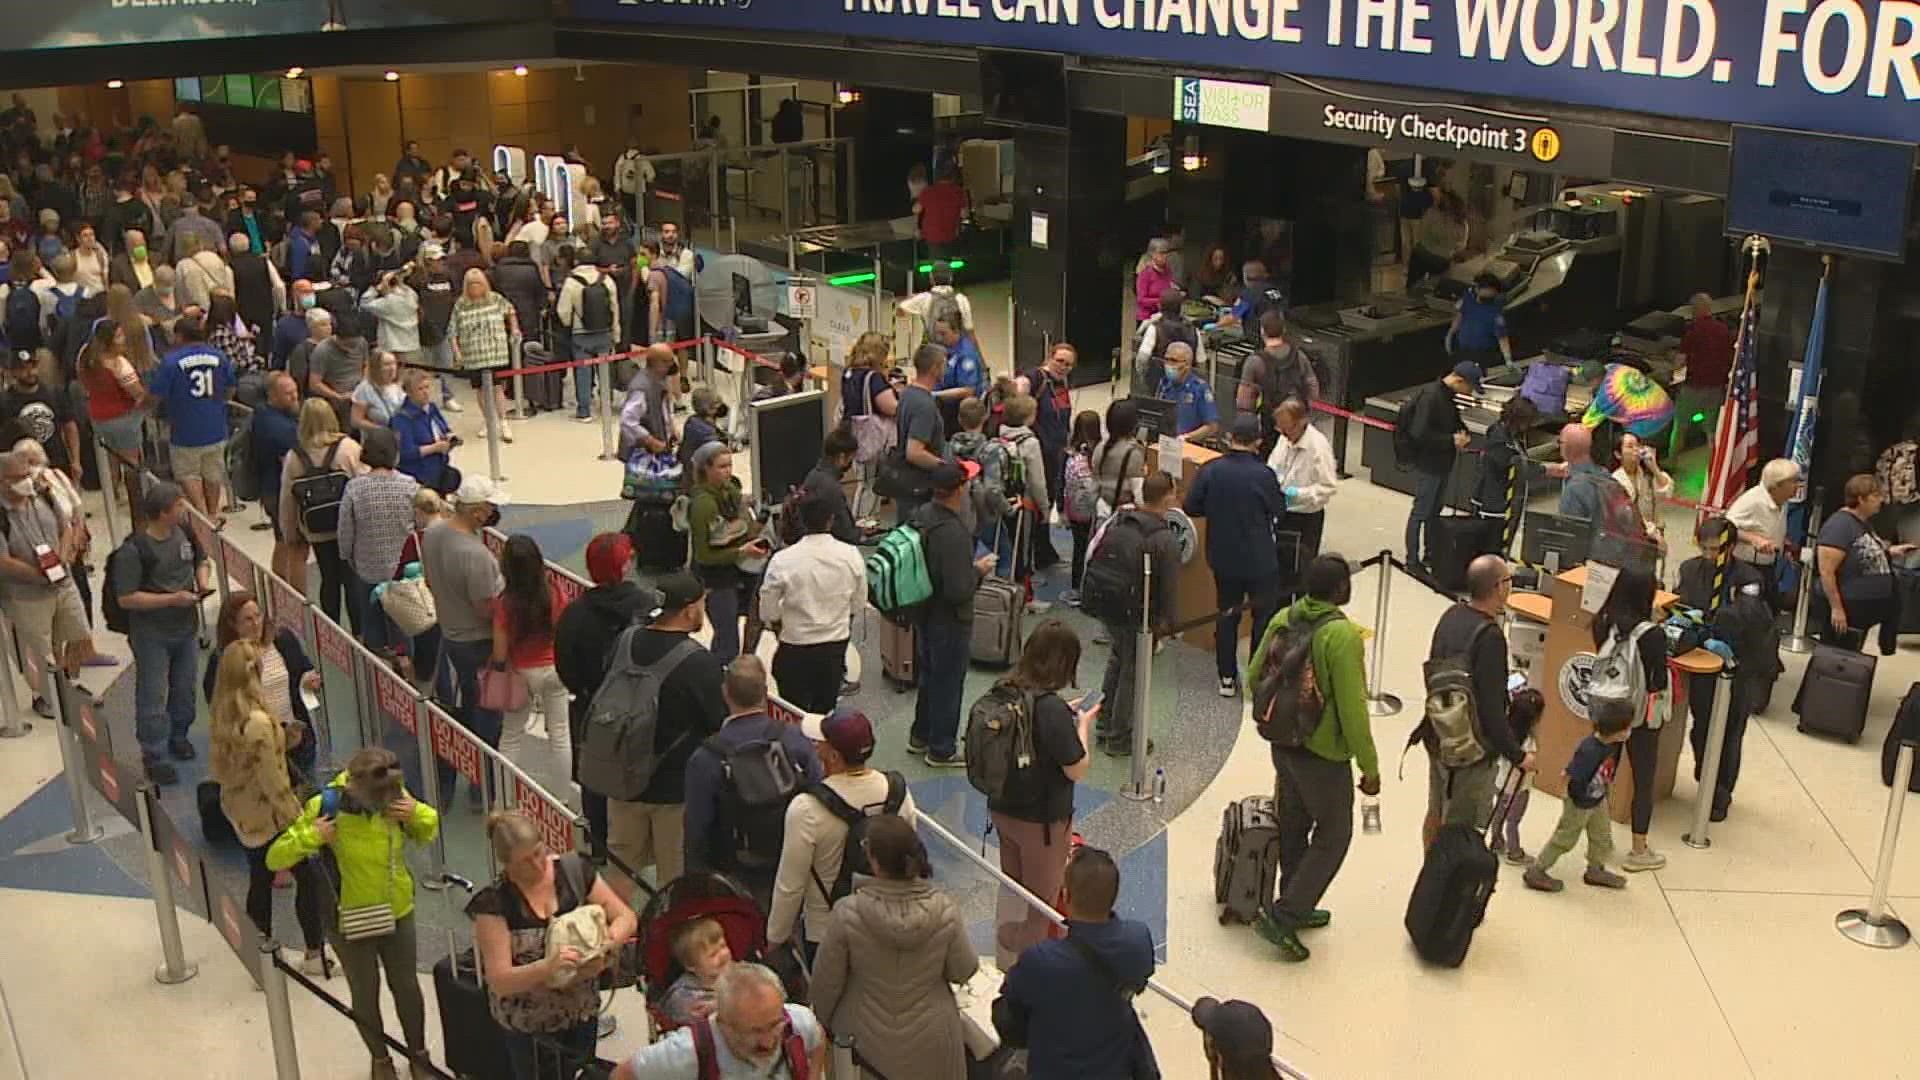 Travelers were warned of extended wait times around 9:40 a.m. on Monday.